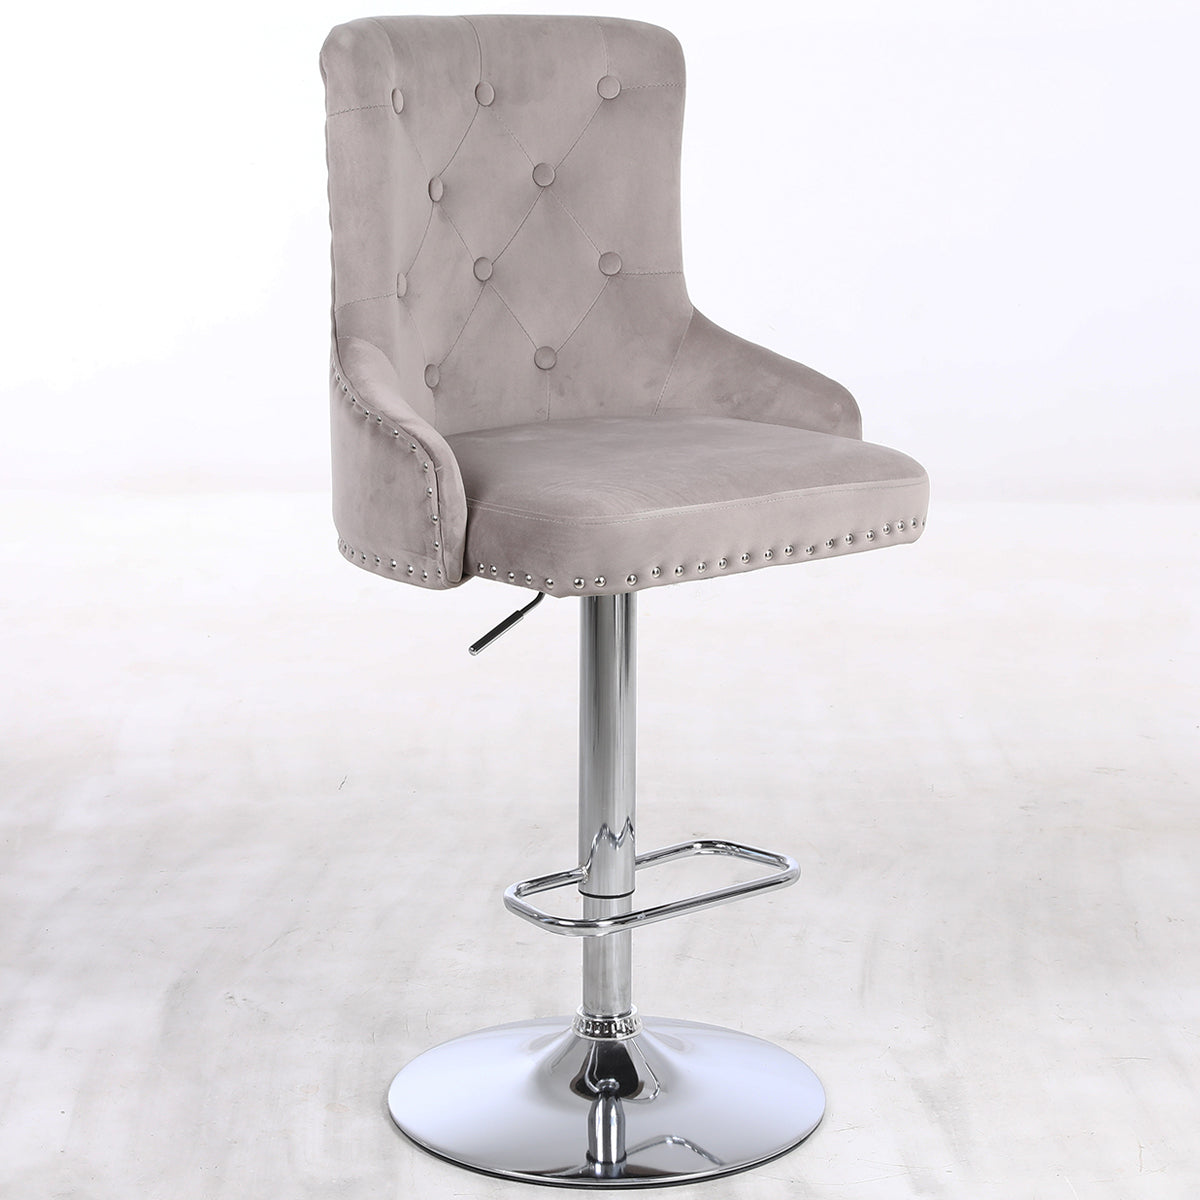 CGC Exclusive Collection - Mink Brushed Velvet & Chrome Stand Luxury Adjustable Bar Stool